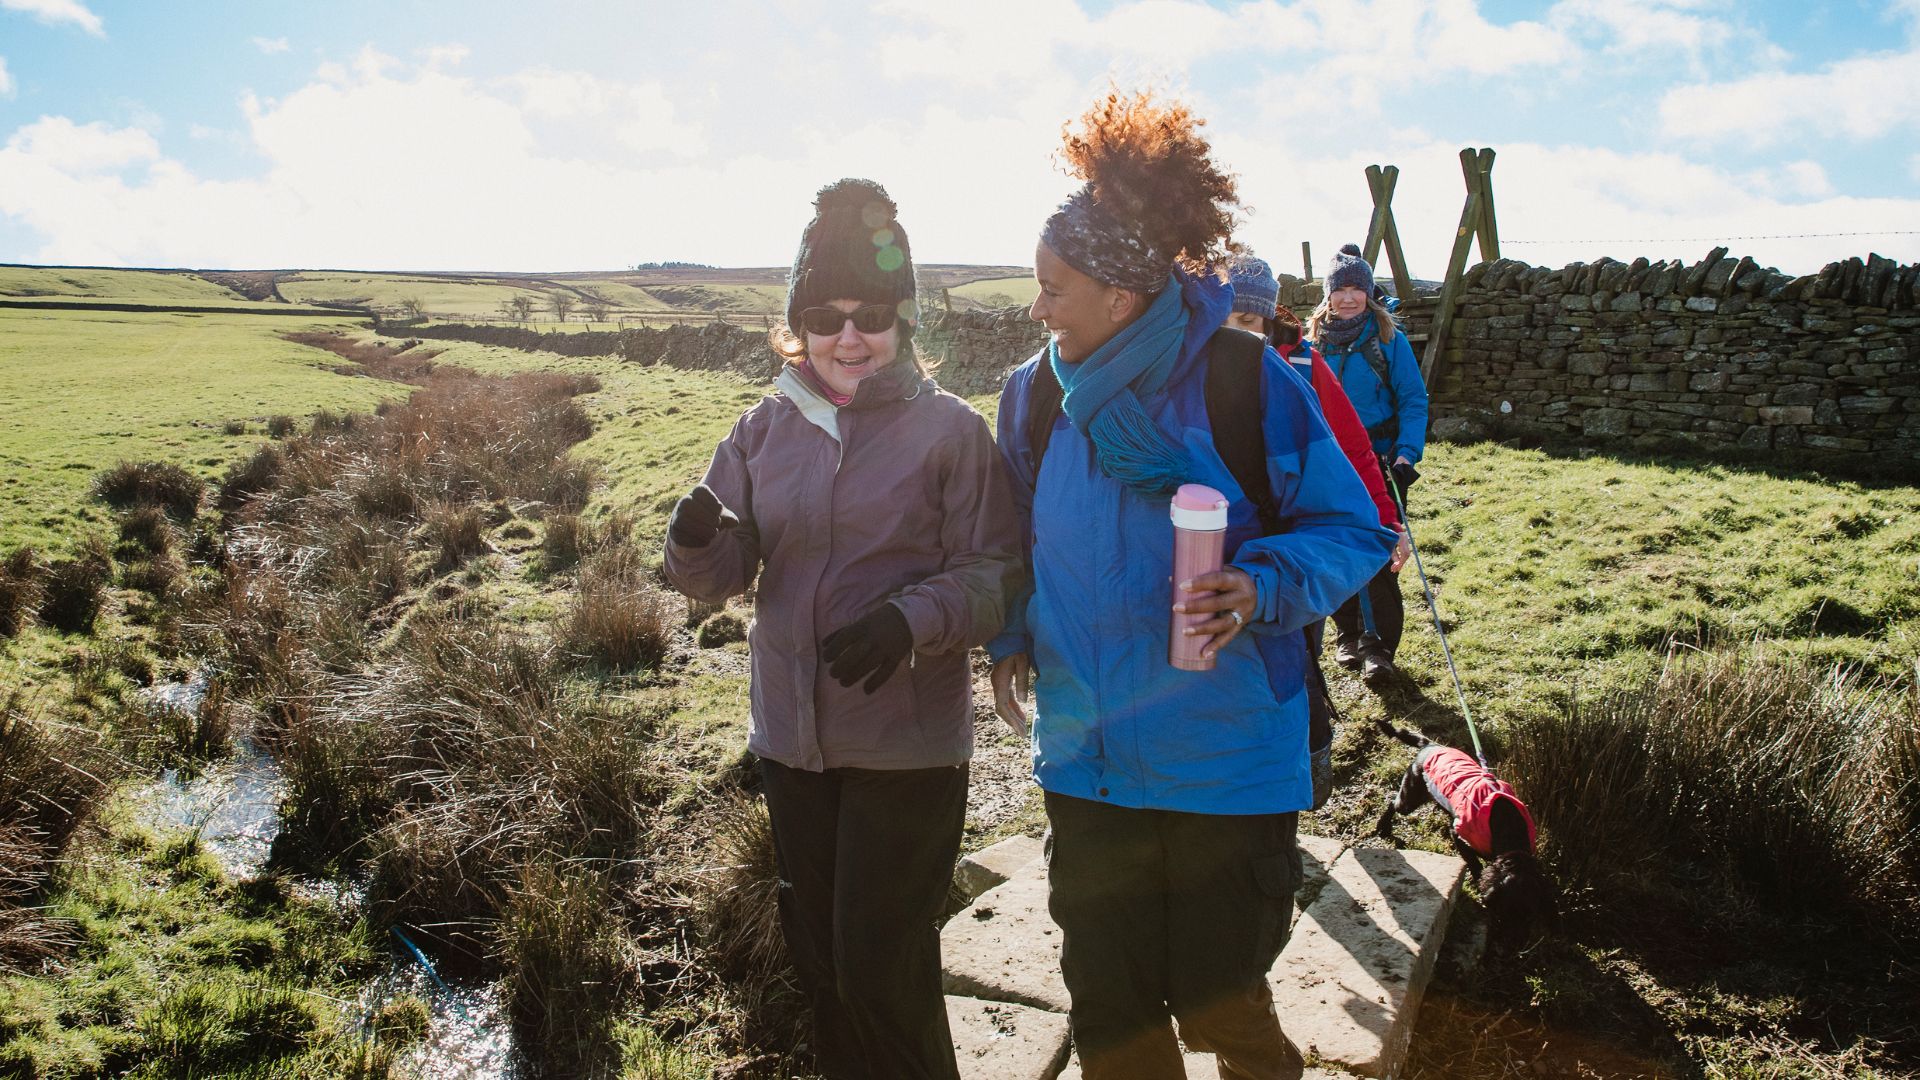 Group of women wearing hiking clothes and carrying water bottles in the cold weather